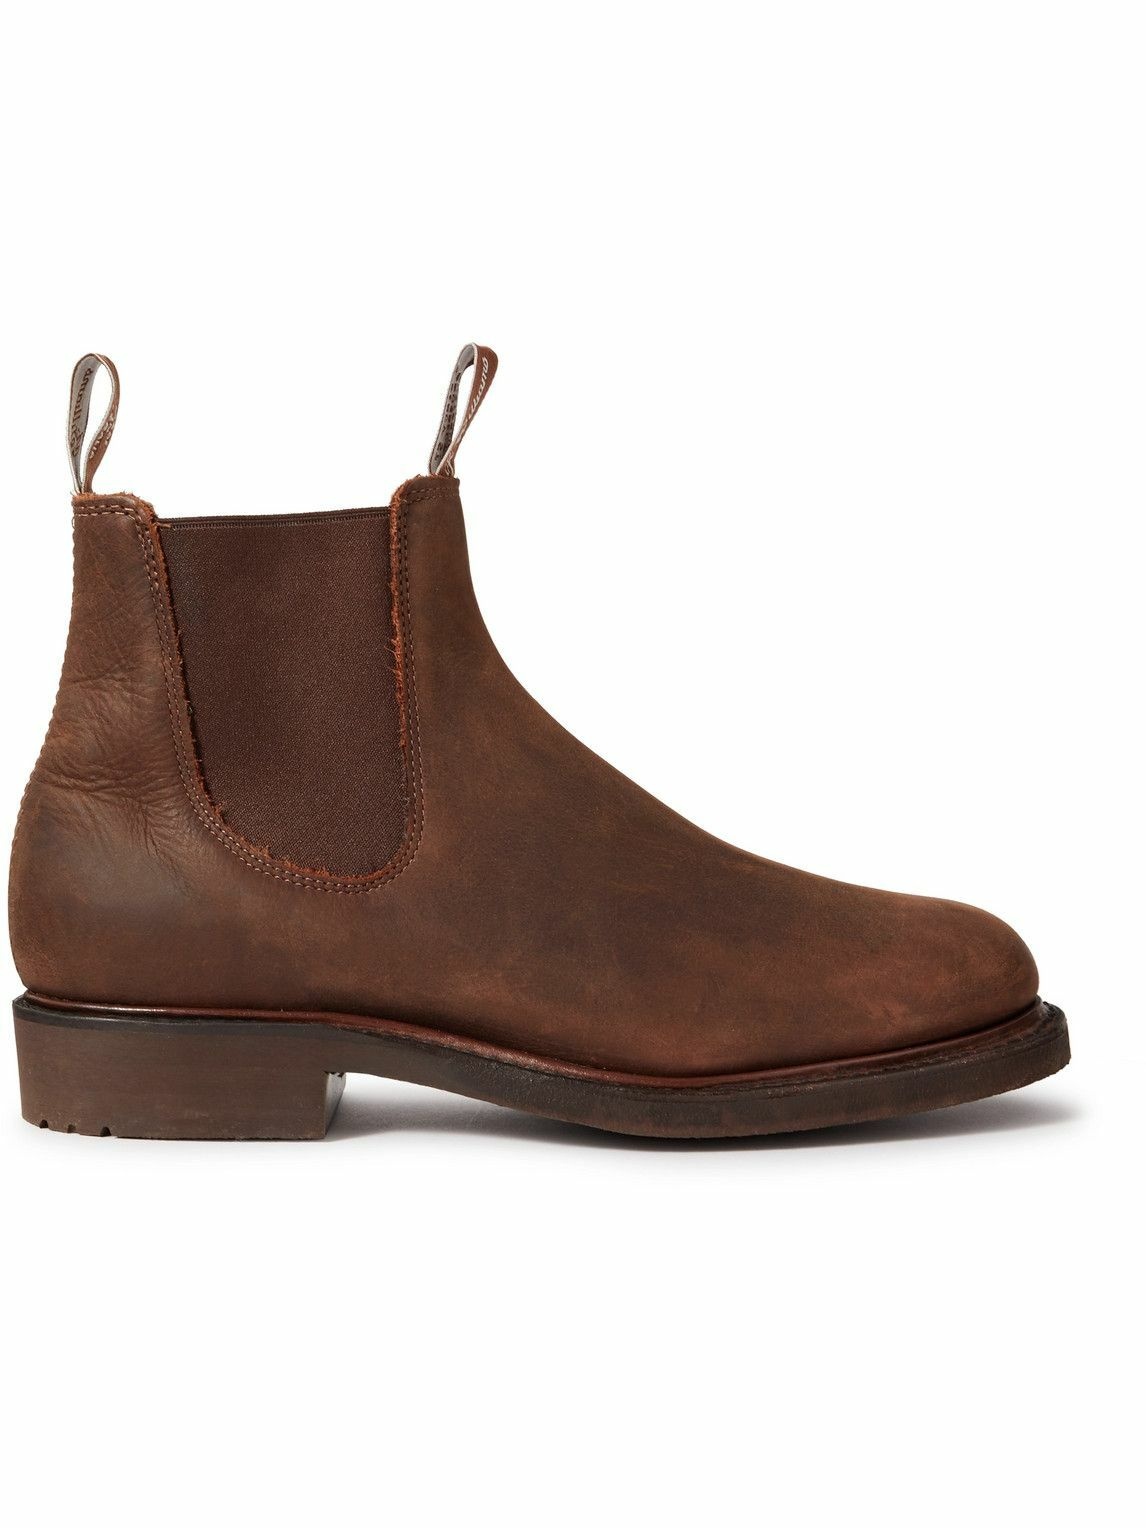 Photo: R.M.Williams - Comfort Goodwood Leather Chelsea Boots - Brown